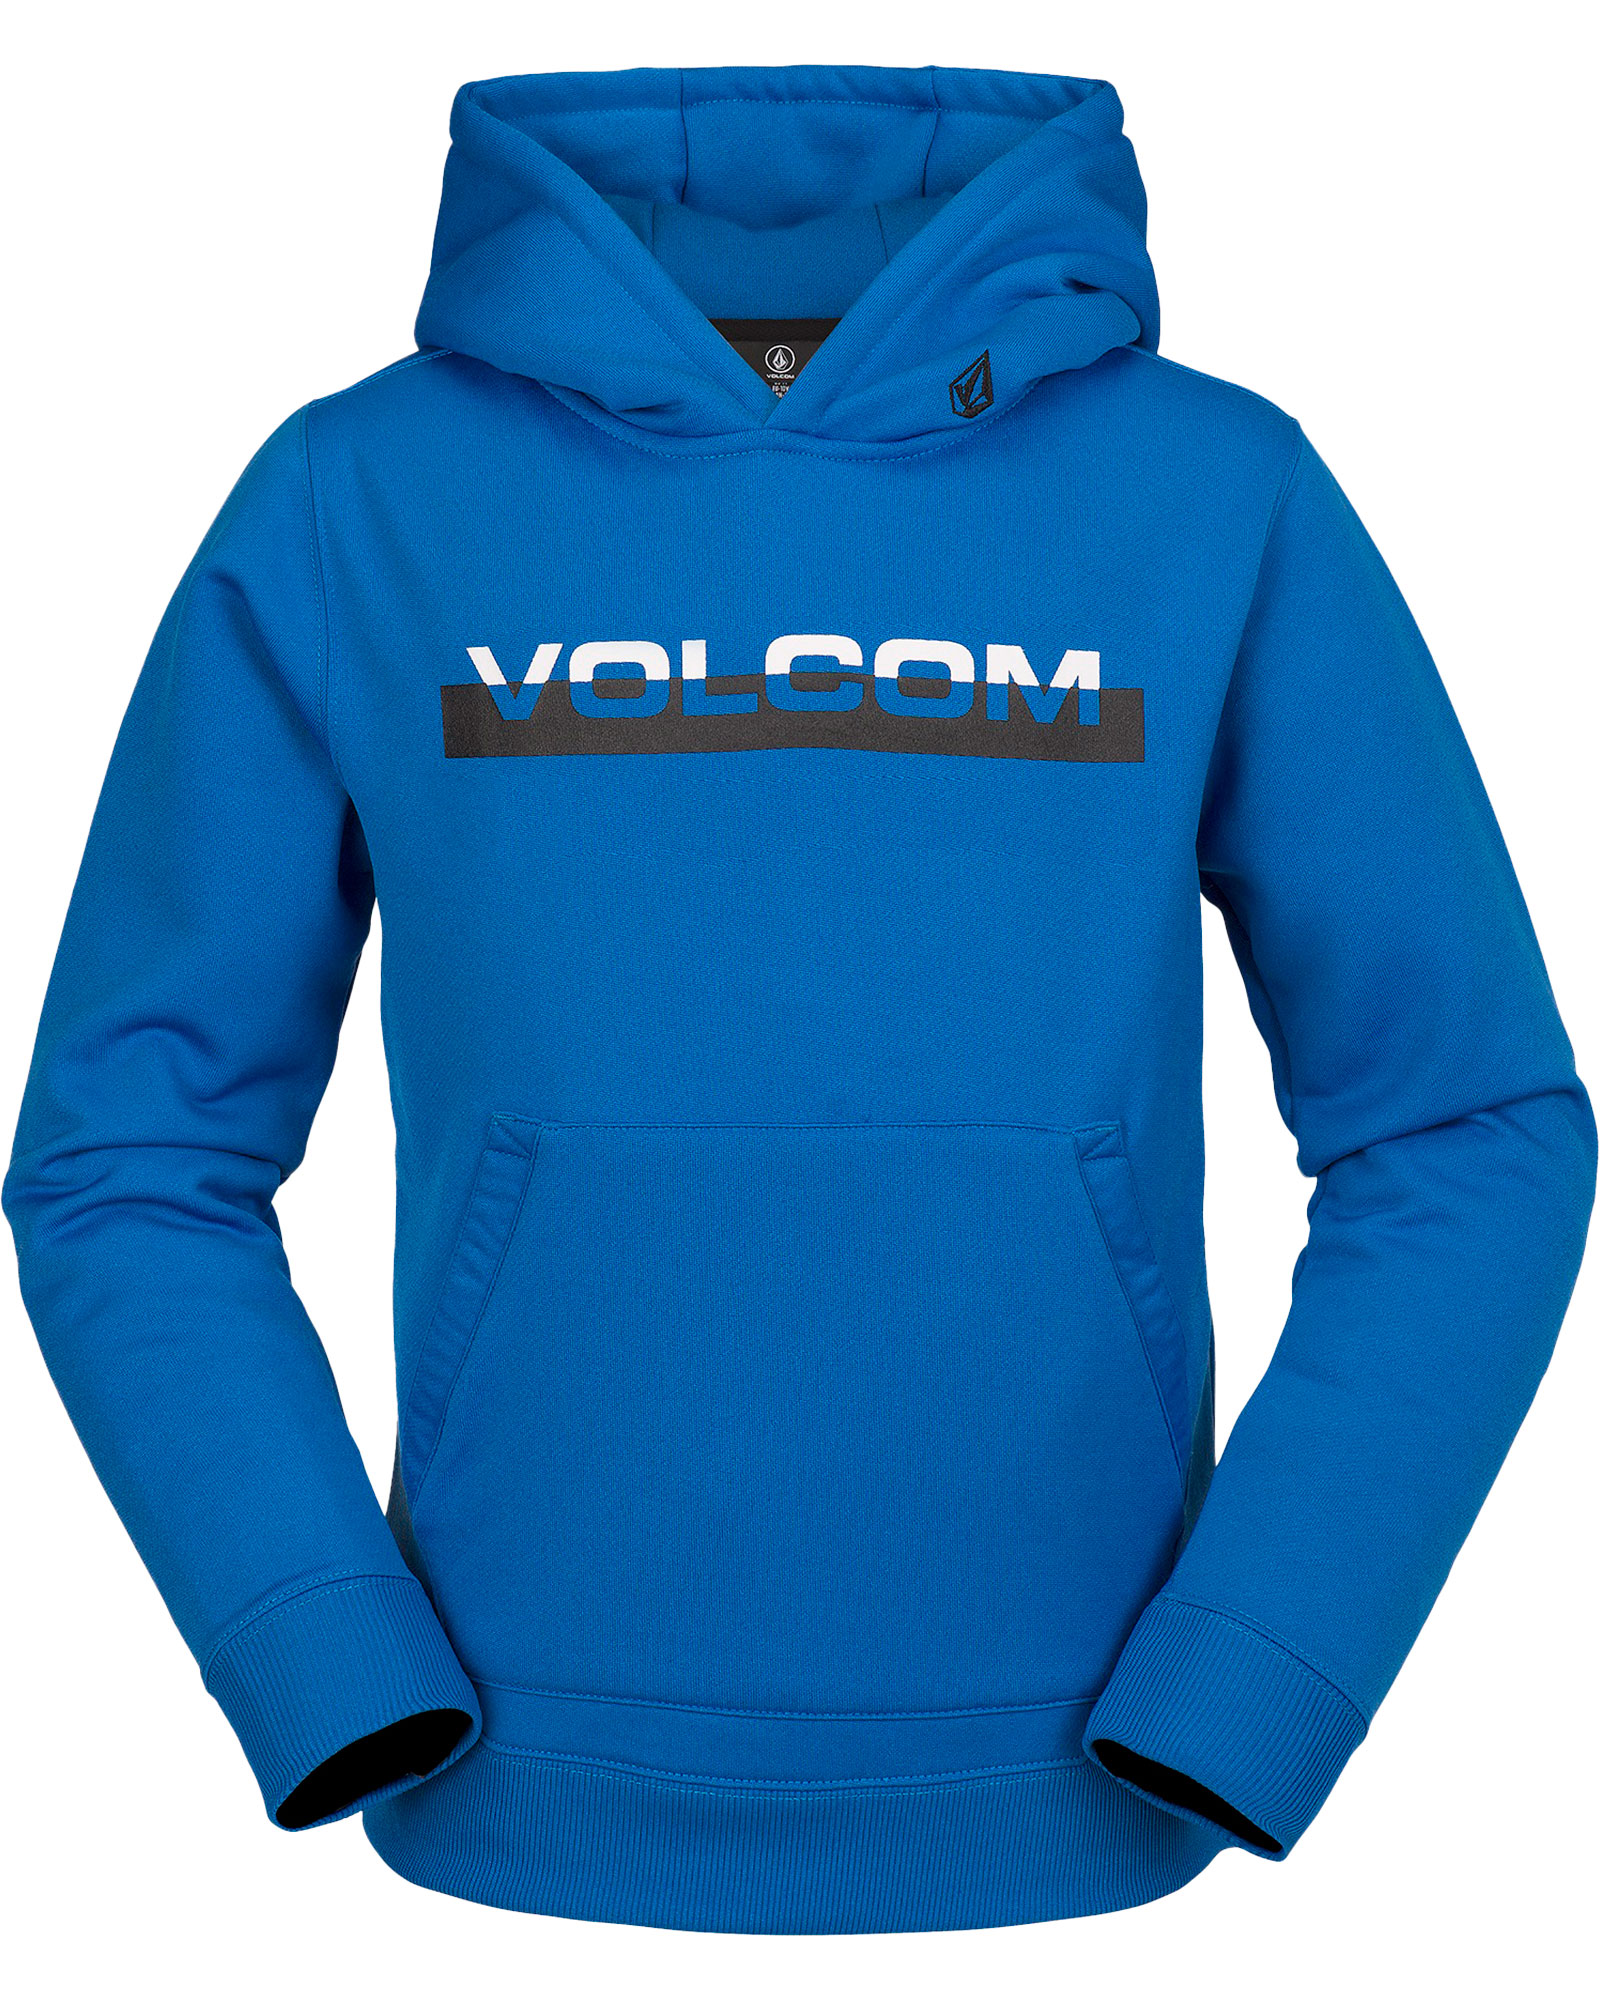 Volcom Youth Riding Fleece - Electric Blue 12 Years